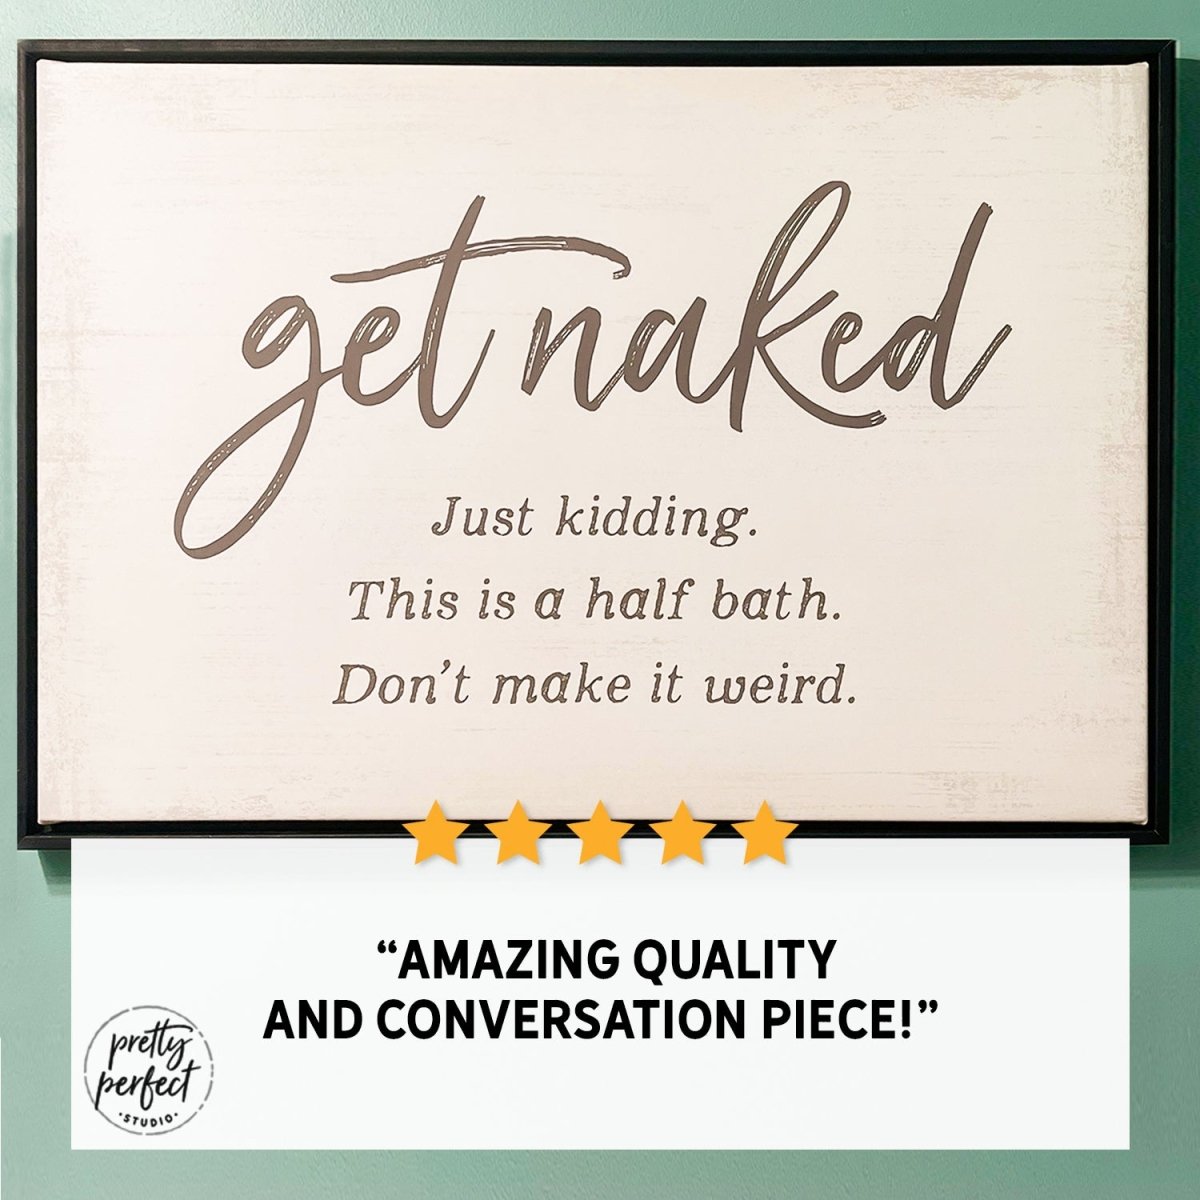 Customer product review for get naked sign by Pretty Perfect Studio